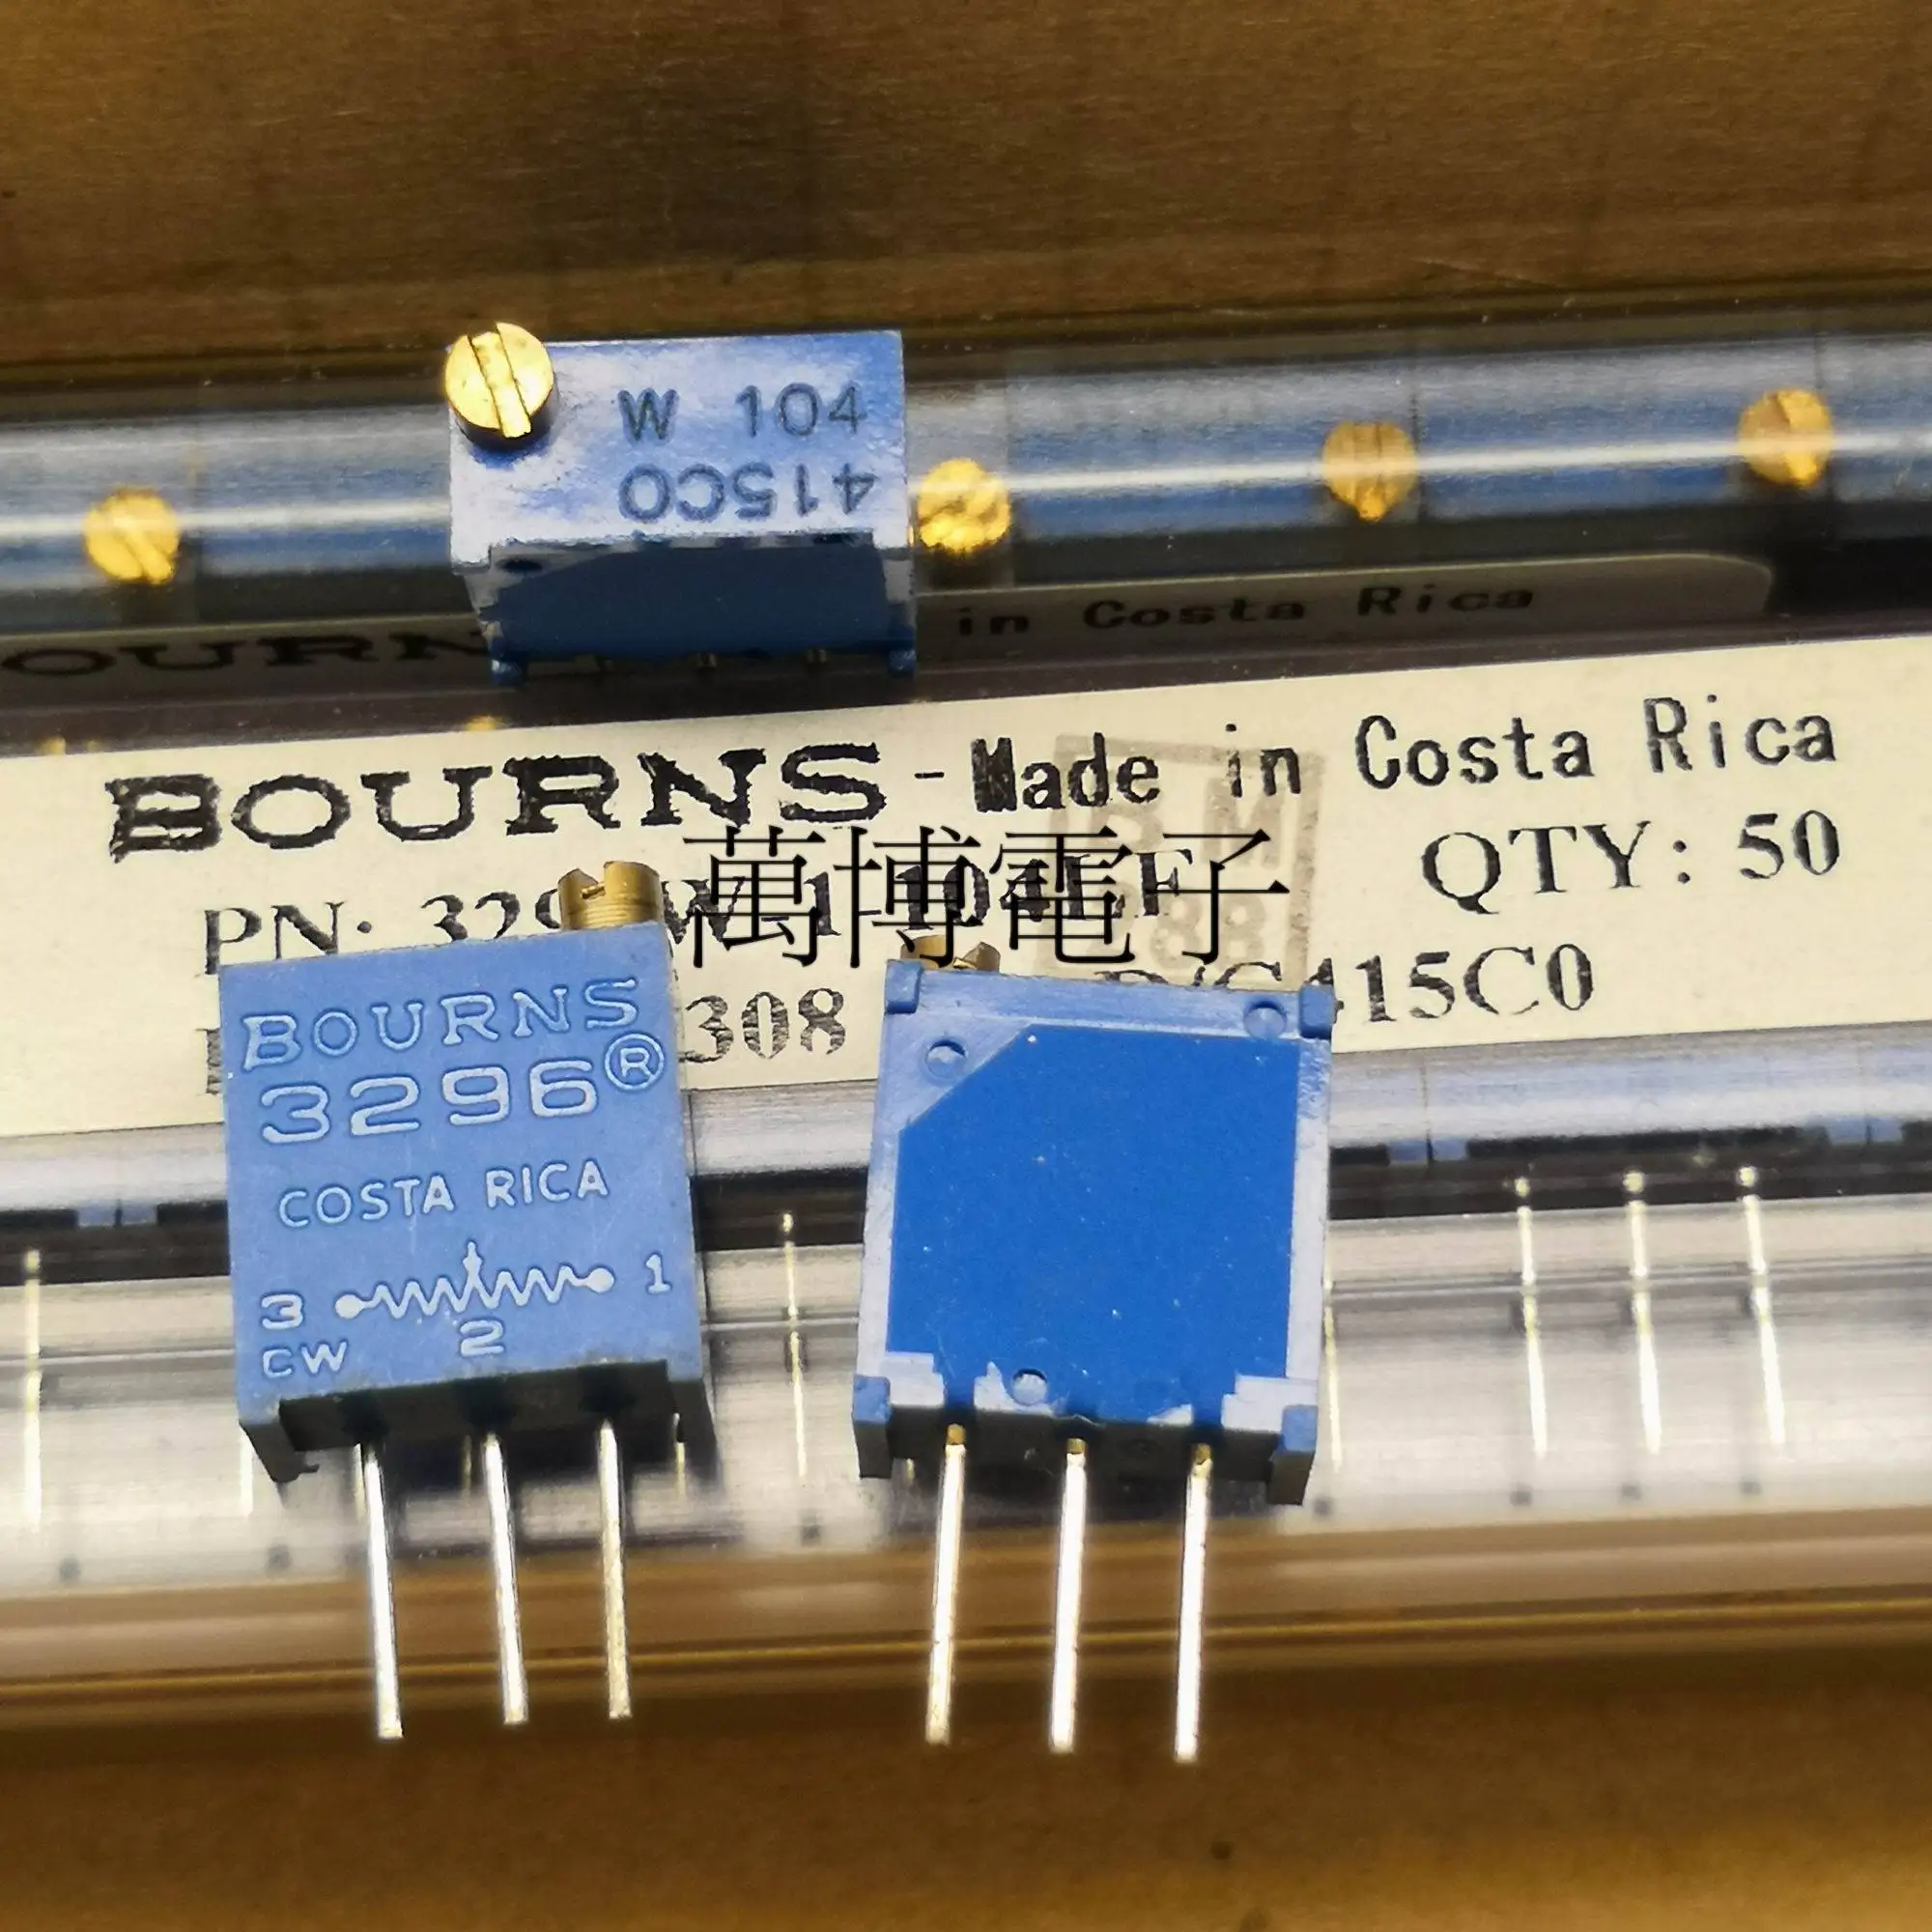 20PCS/50PCS U.S. BOURNS precision adjustable 3296W-104 100K variable resistor Made in Costa Rica FREE SHIPPING